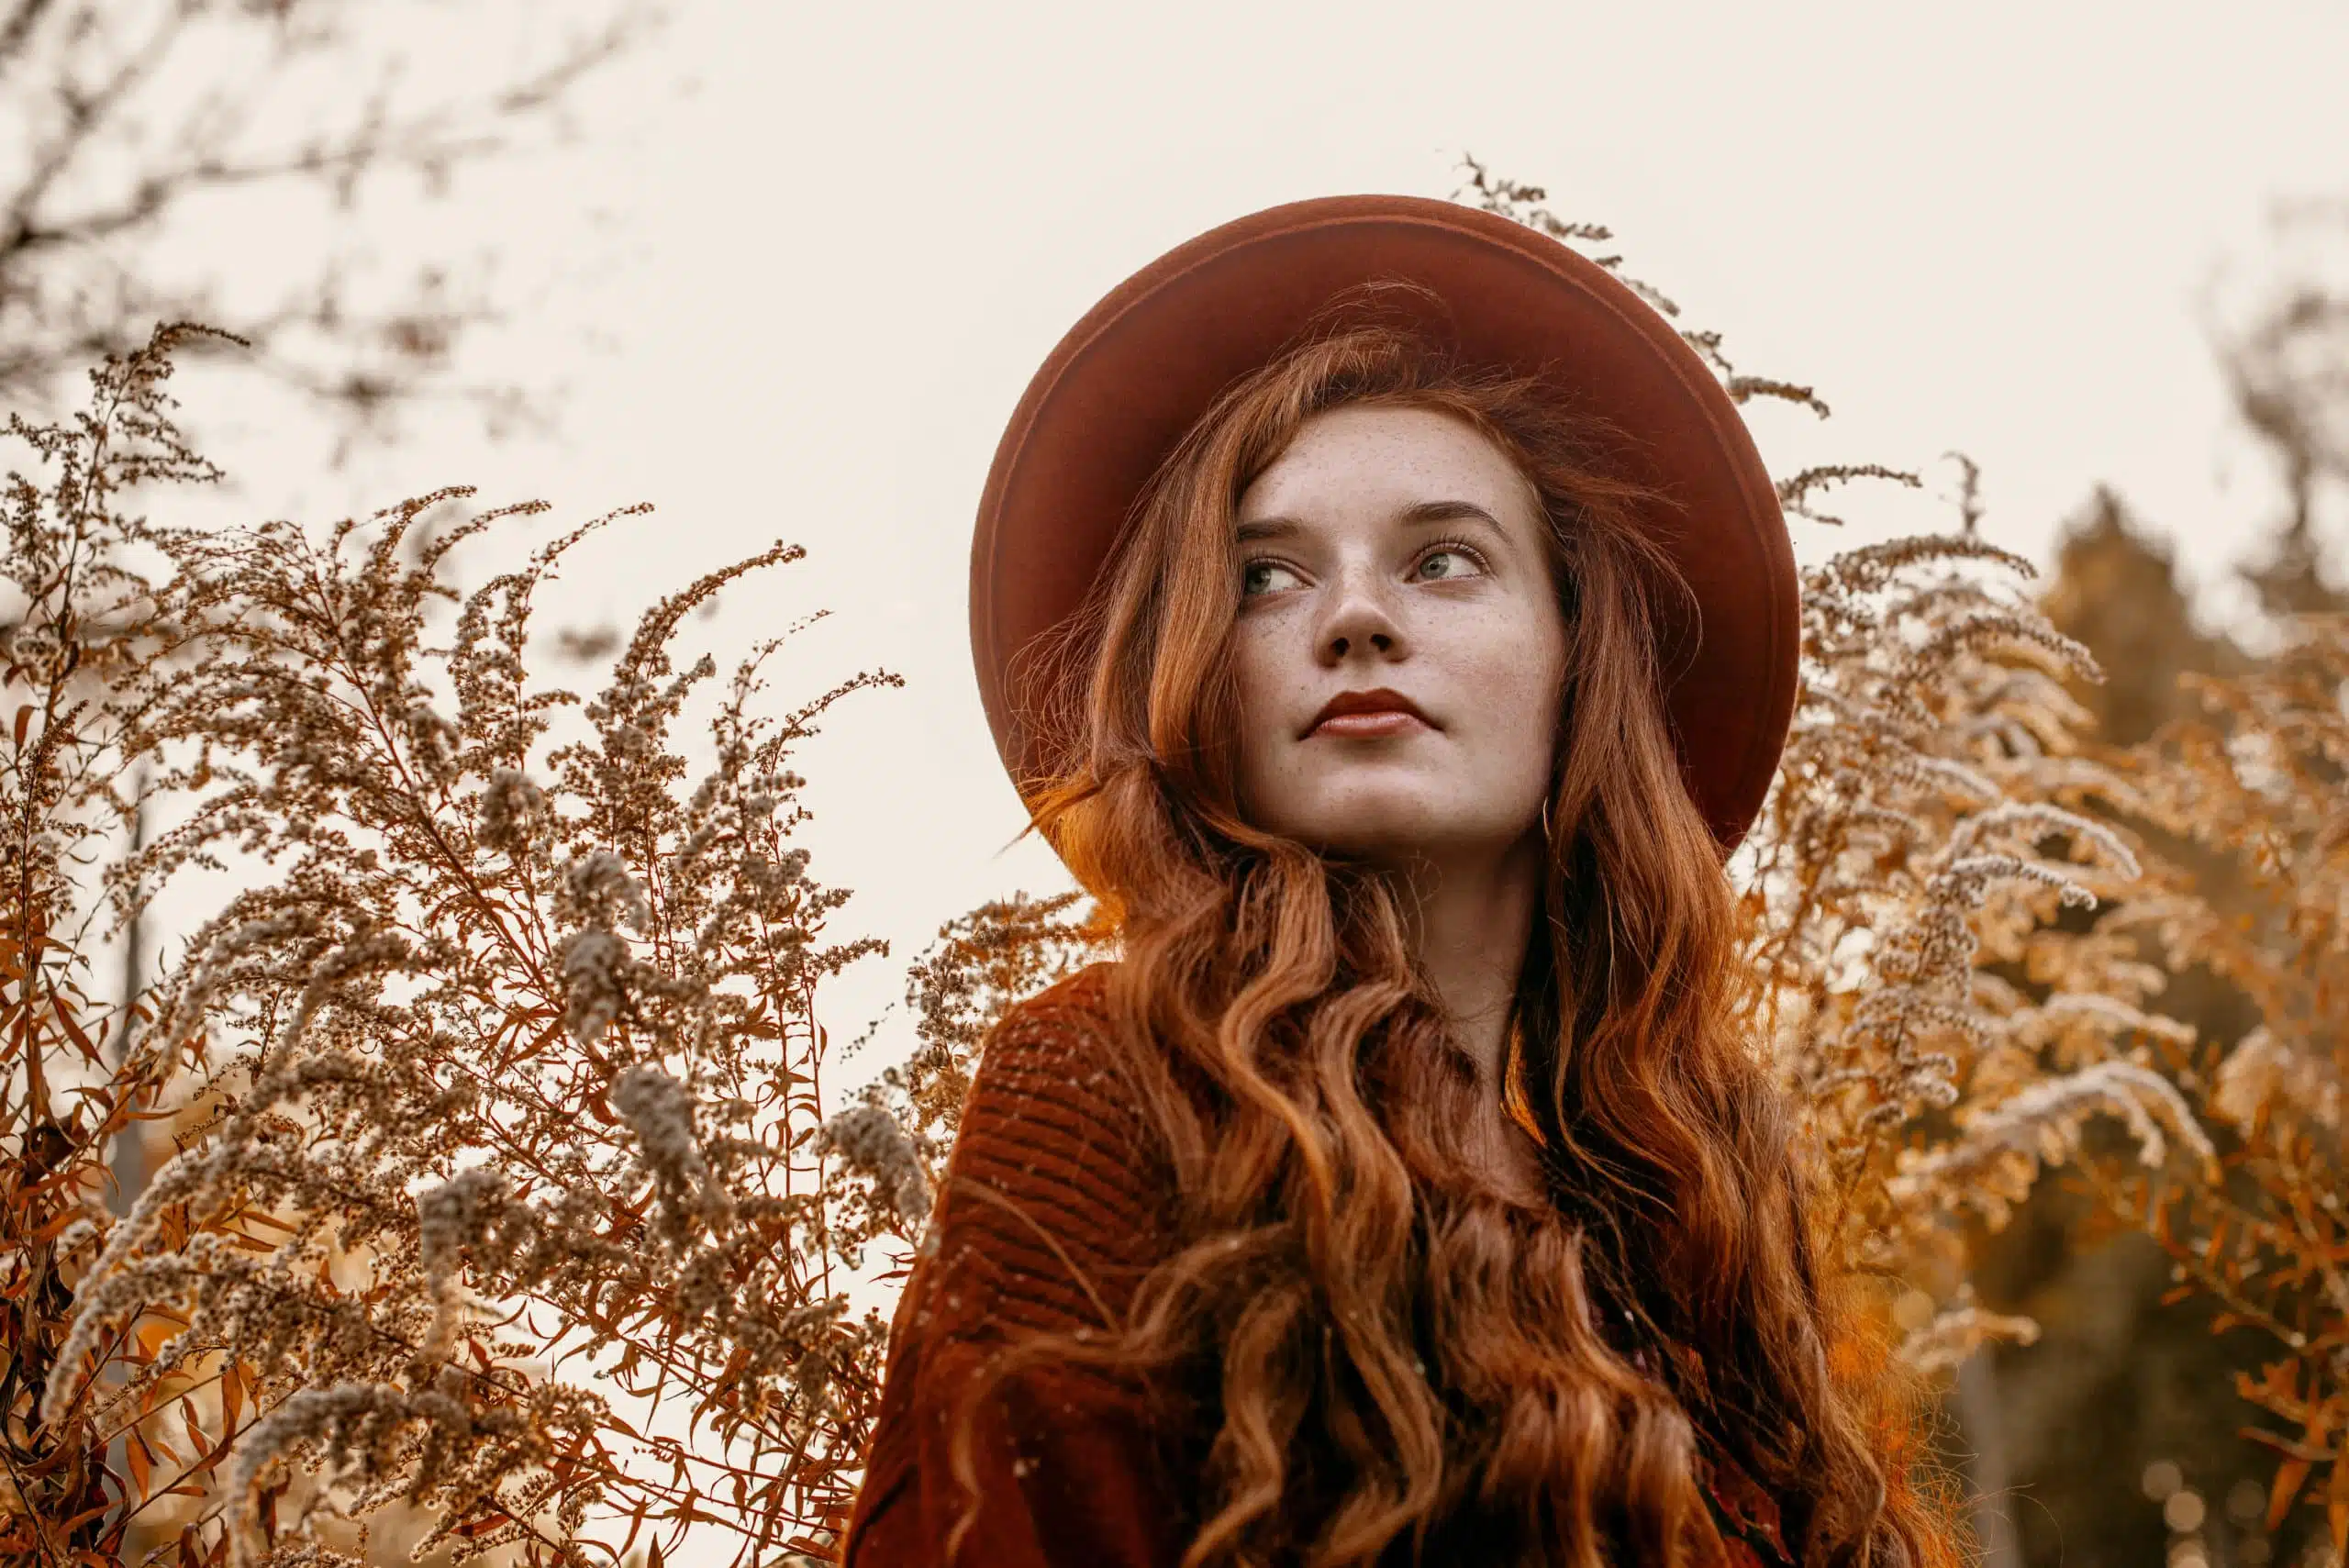 Young attractive redhead woman outdoors standing wearing a sun hat.